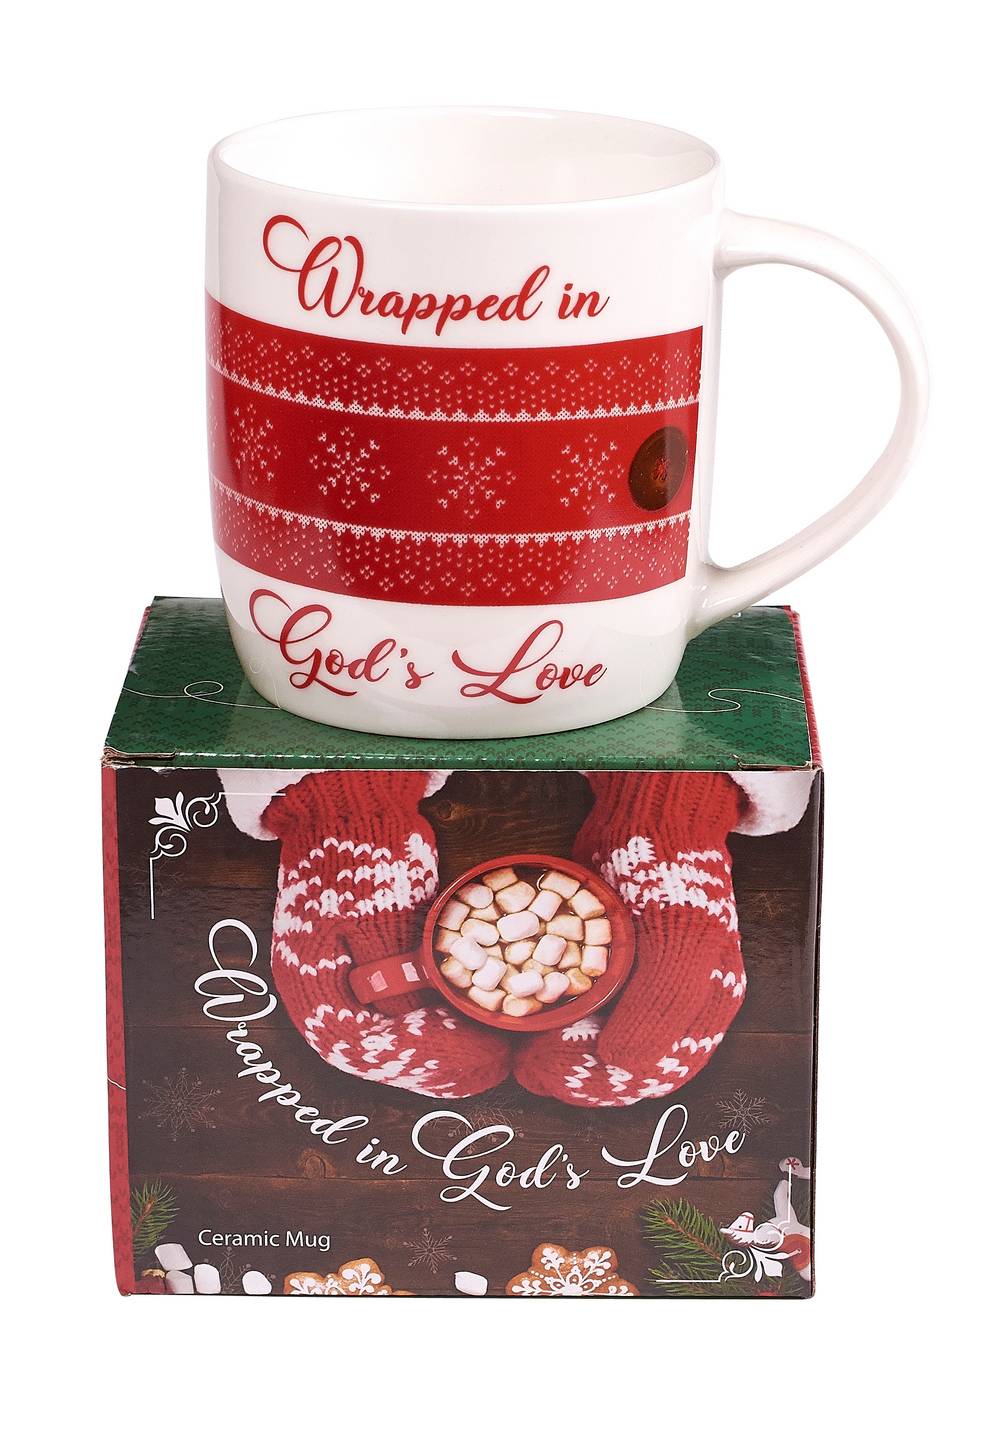 Wrapped in God's Love ceramic mug and matching gift box